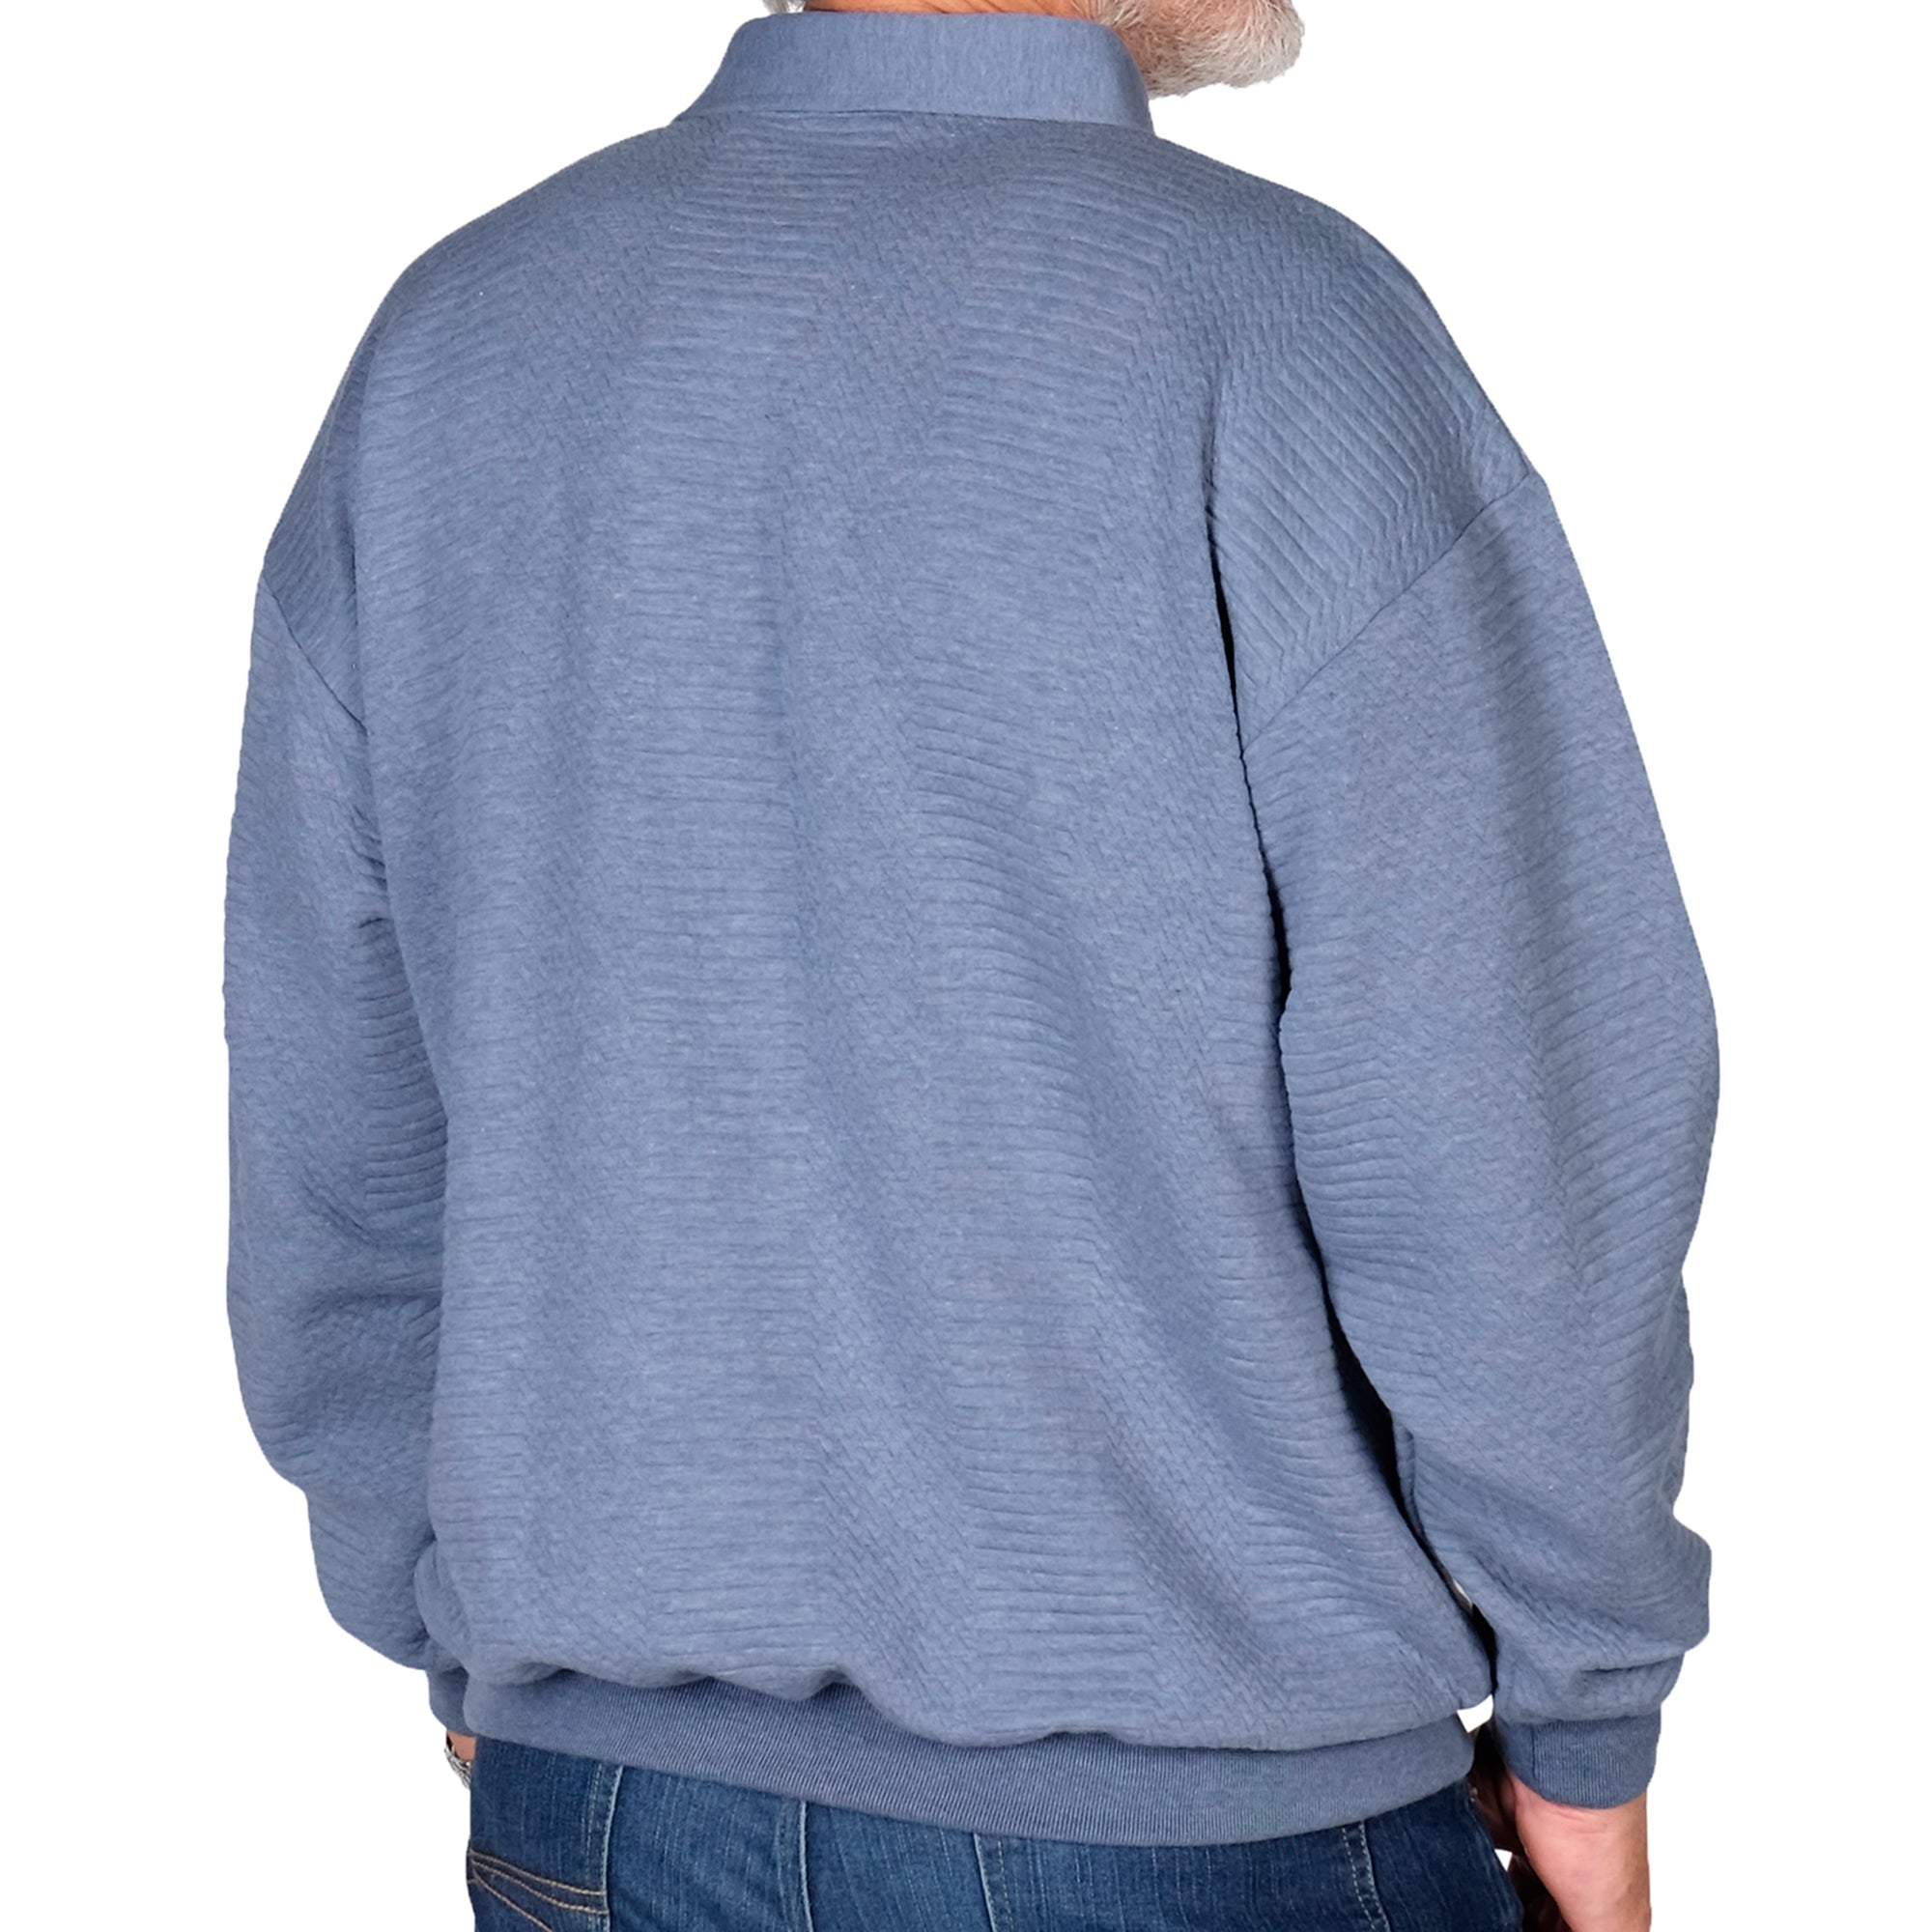 Banded Bottom Shirt Co. Long Sleeves Knit Solid - Big and Tall